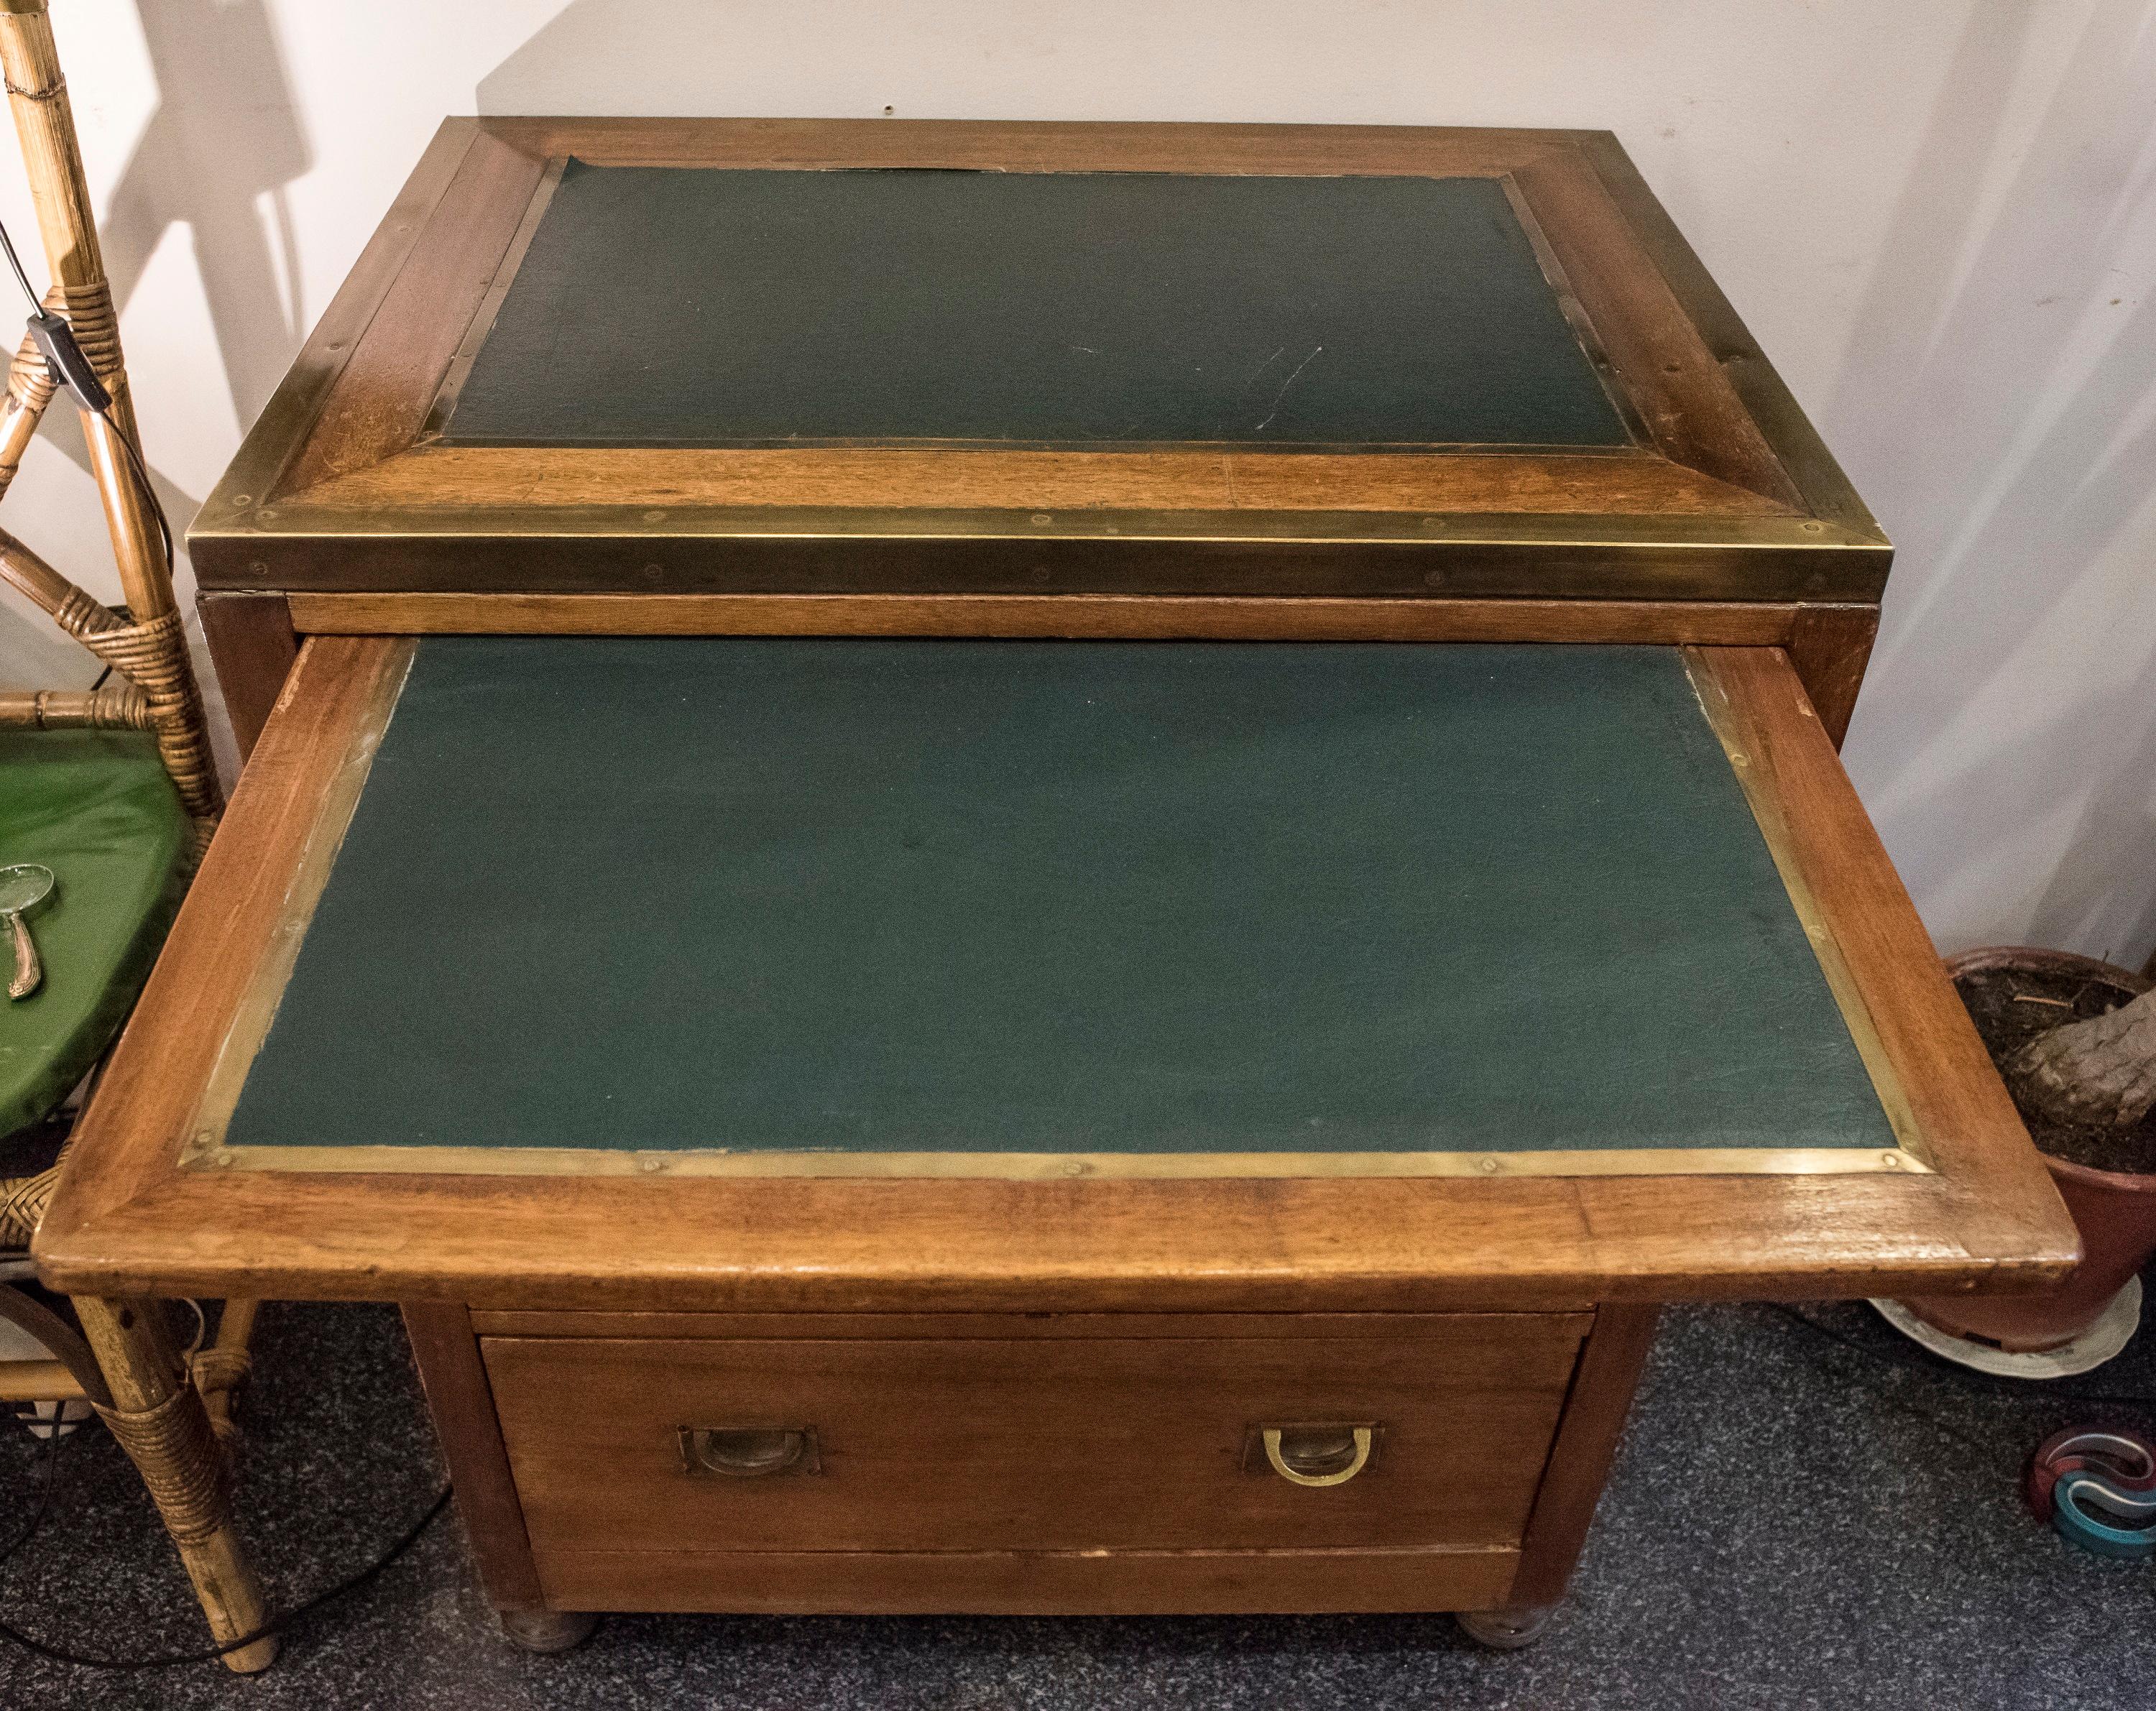 19th Century English Camphor Boat Chest of Drawers with Table for Desk 8